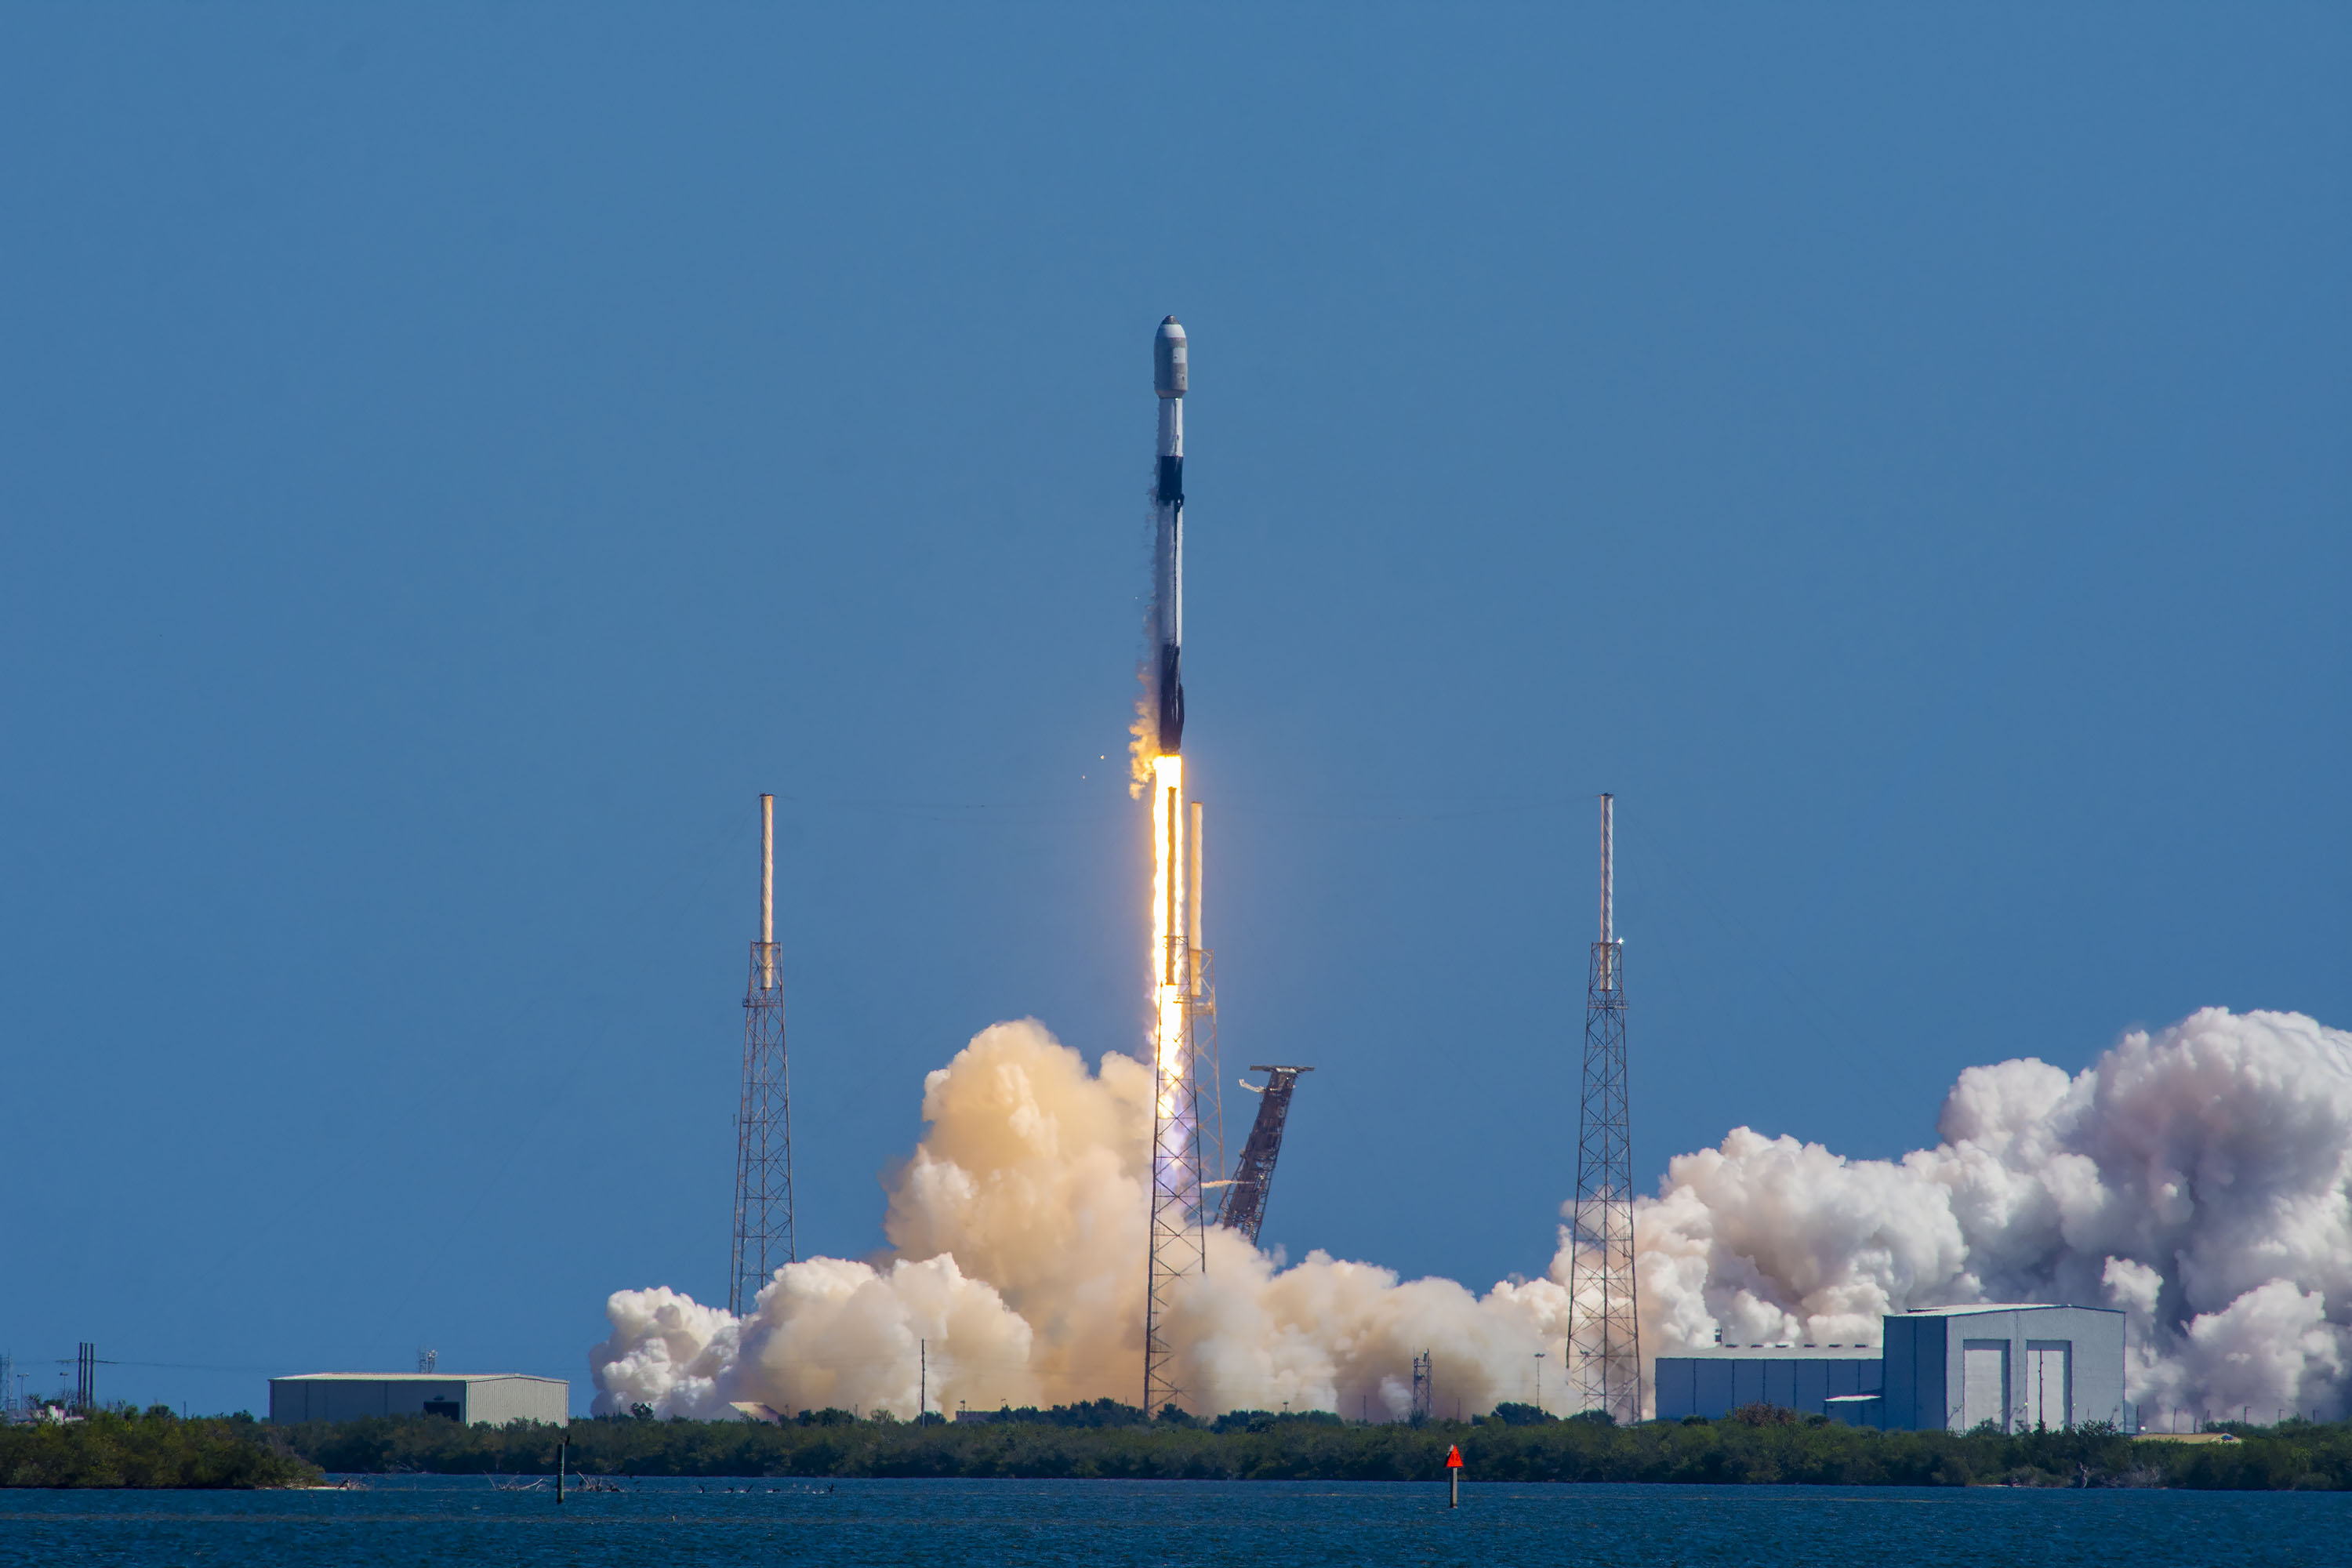 Flight-proven SpaceX Falcon 9 rocket launches 56 Starlink satellites to orbit